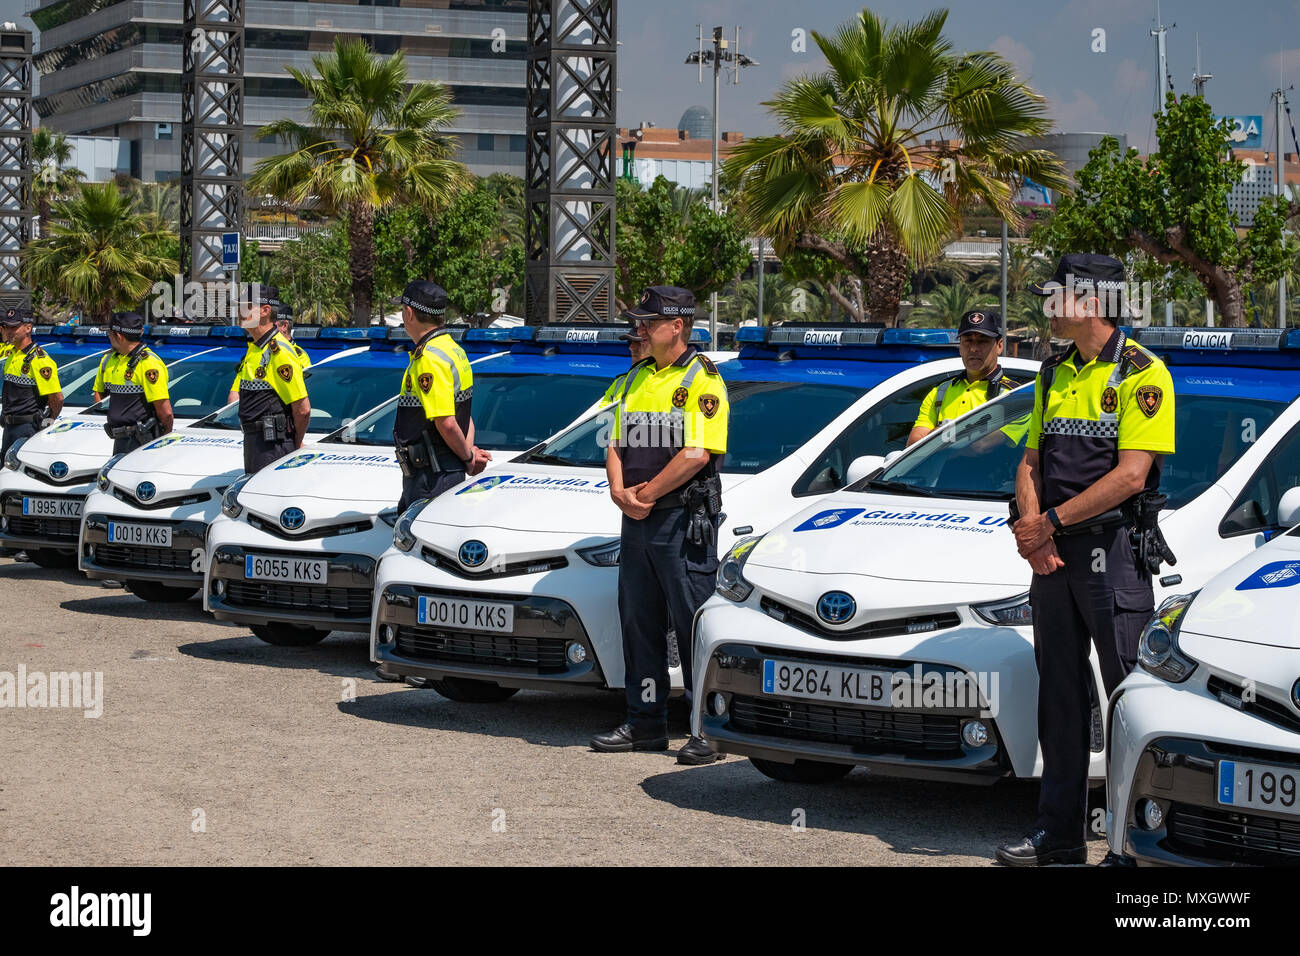 Barcelona, Spain. 4th June, 2018. New vehicles of the urban guard of Barcelona are seen with their police units. With the presence of Mayor Ada Colau and the security commissioner Amadeu Recasens, the presentation of the new patrol vehicle fleet of the Guardia Urbana de Barcelona Police  has taken place. The investment was 12.6 million euros. The new vehicles with a hybrid system allow a fuel saving of 608 euros per vehicle per year. These new cars are equipped with new communication technology and cameras with license plate recognition. Stock Photo